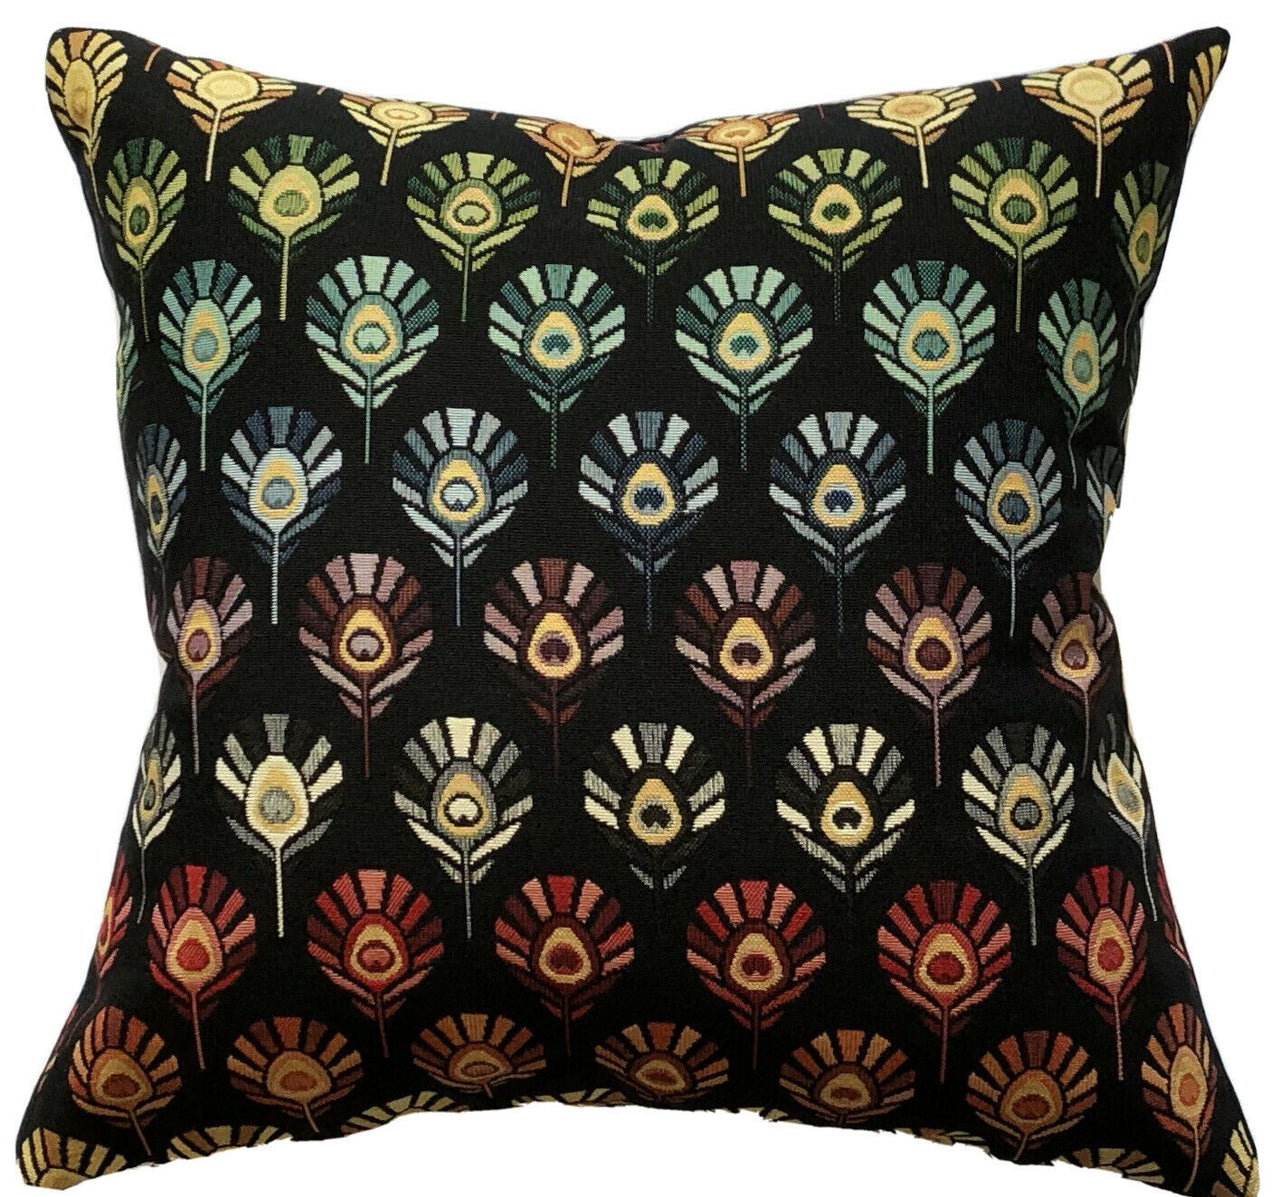 Peacock feathers geometric pattern black cushion cover rainbow colors woven tapestry